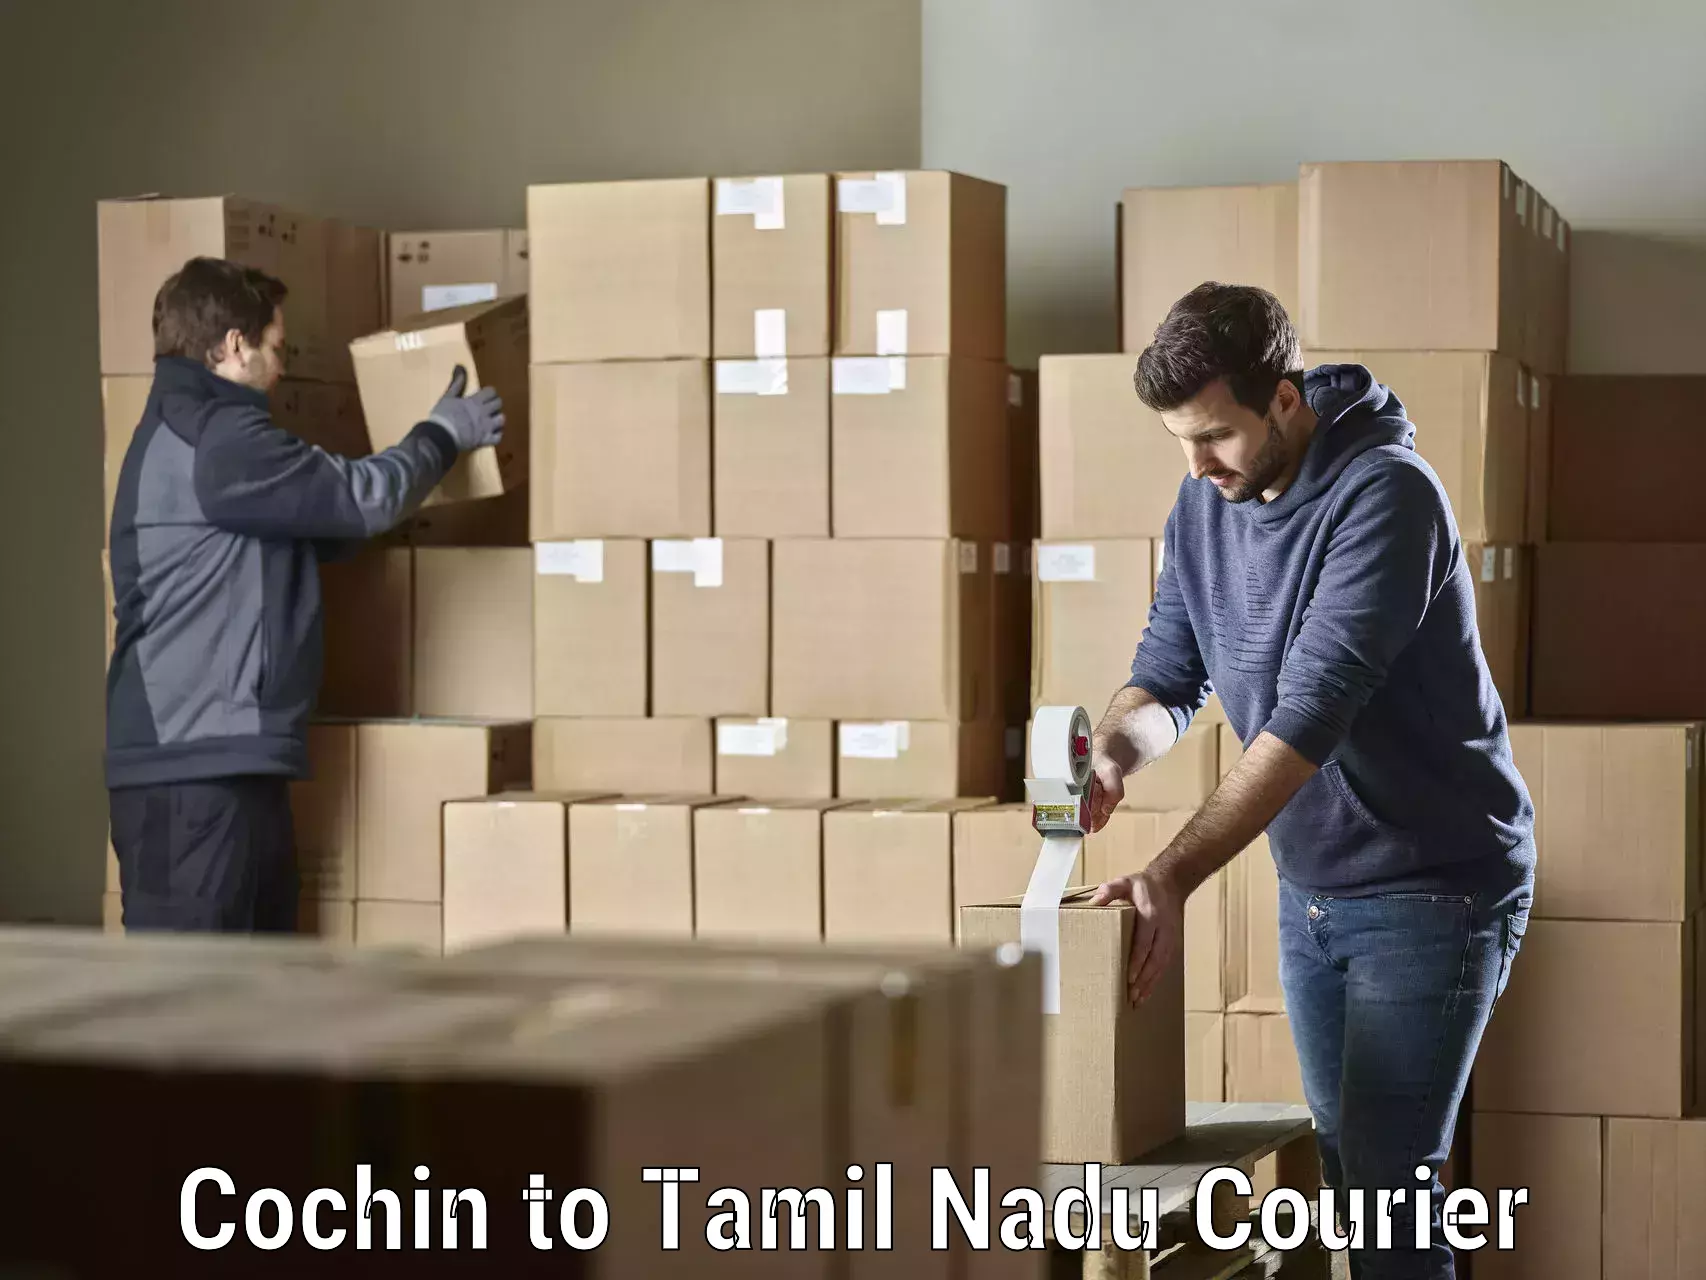 Reliable delivery network Cochin to Chennai Port